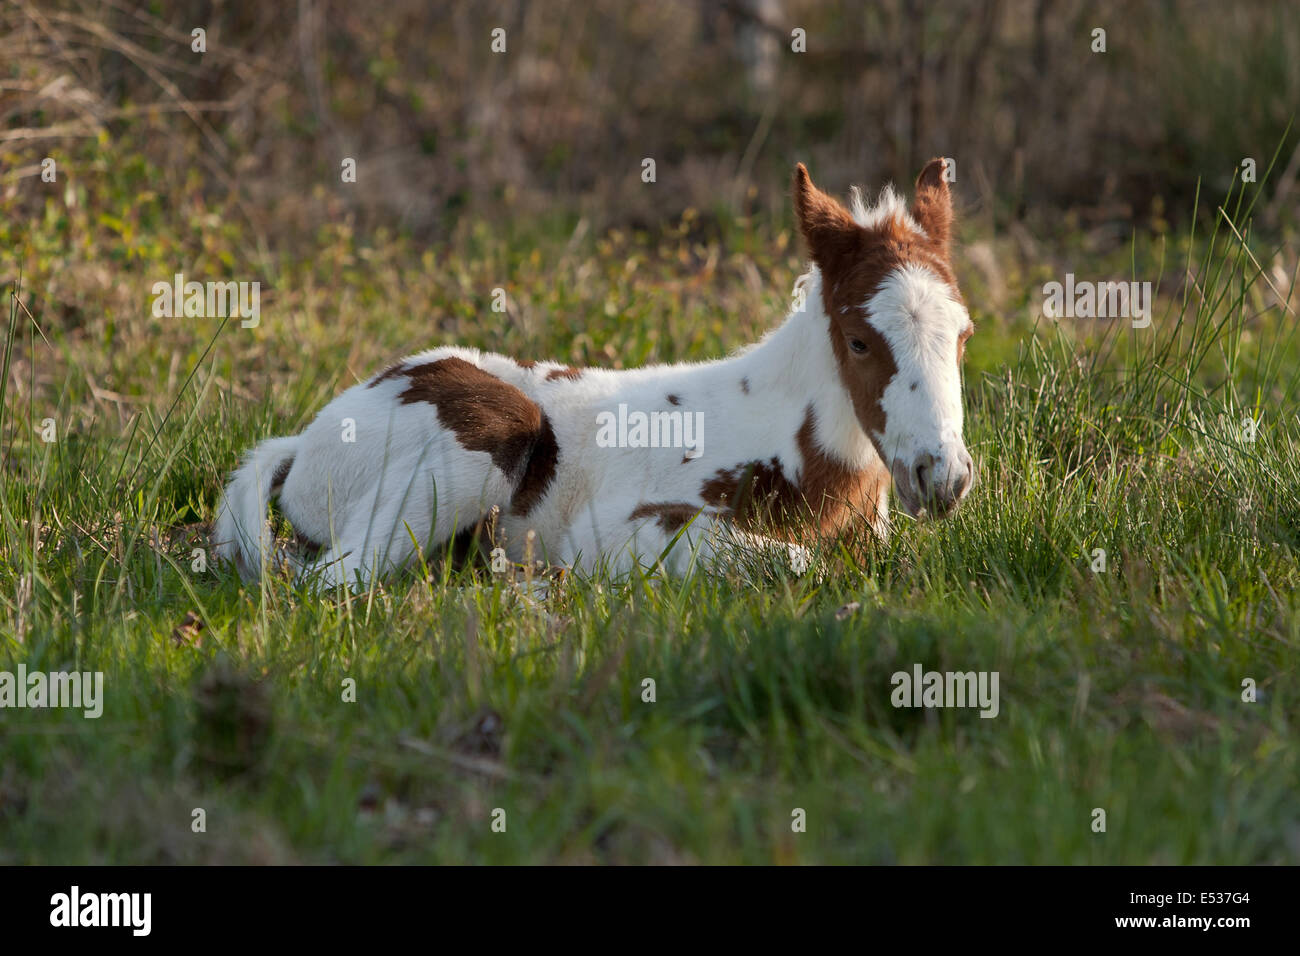 Foal is resting in the grass of field Stock Photo